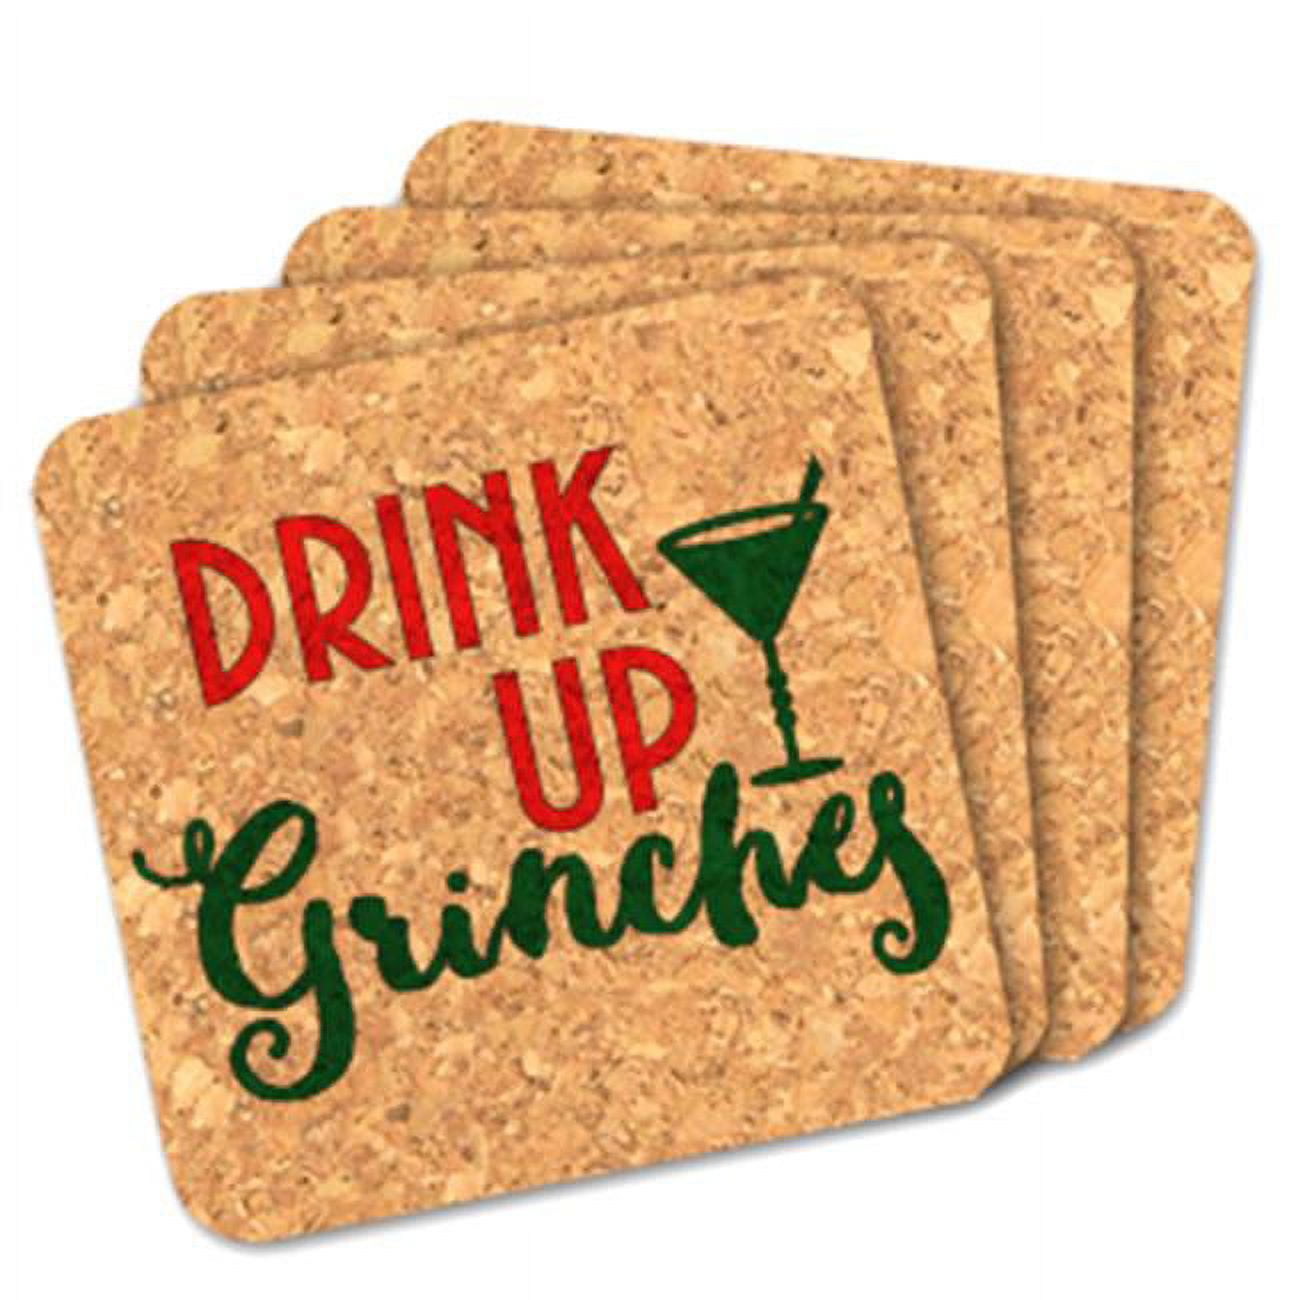 8407242 4 X 4 In. Drink Up Grinches Square Cork - Set Of 4